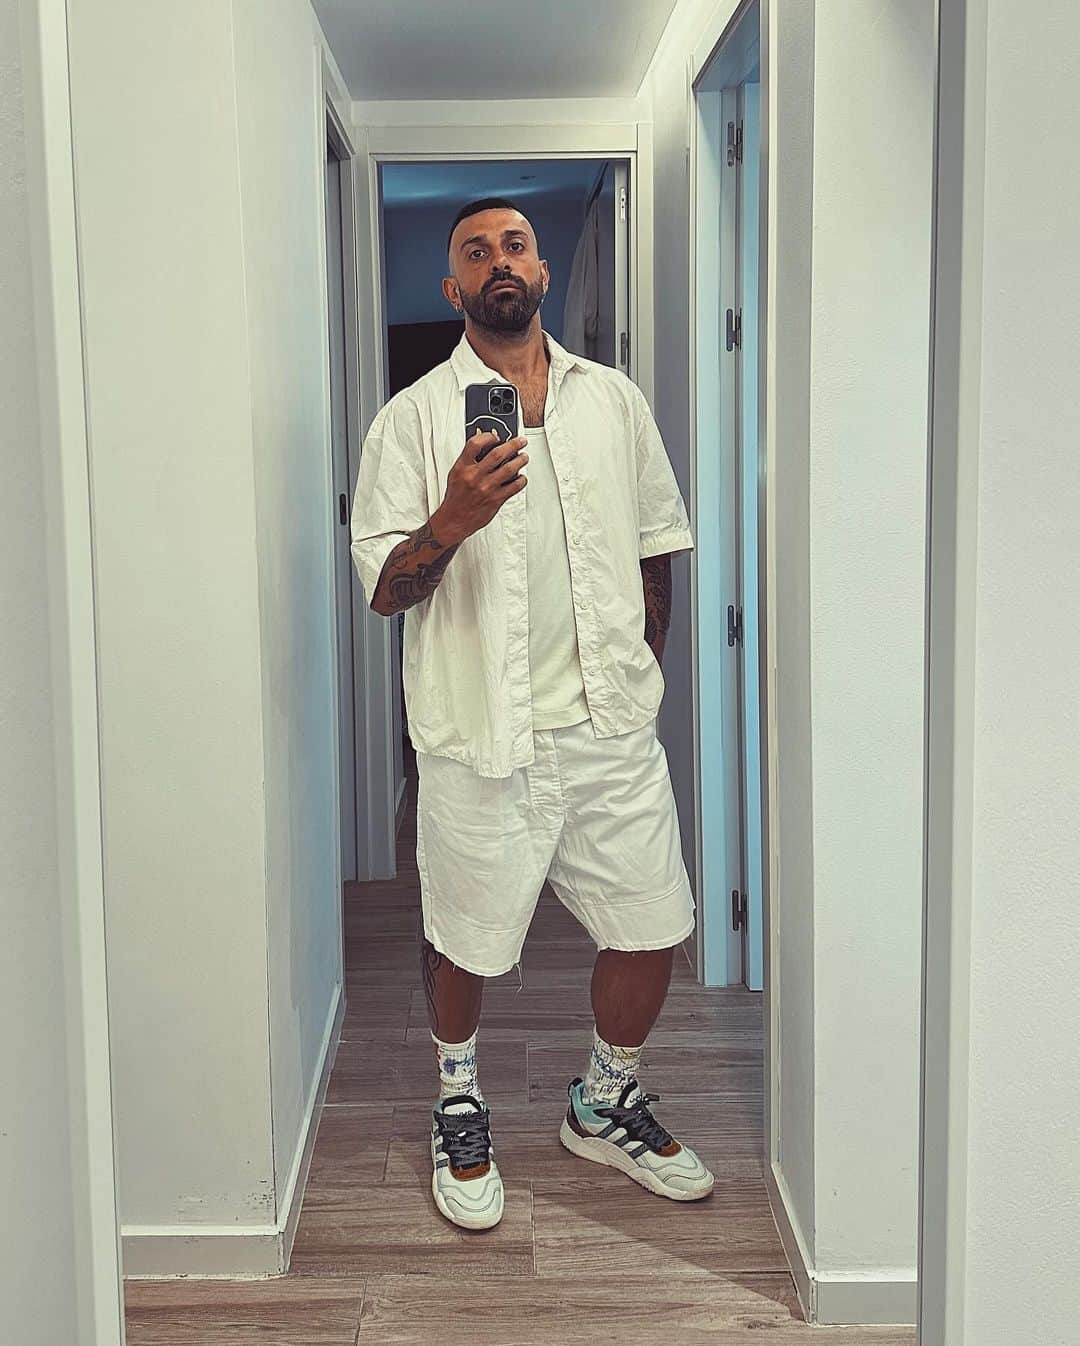 Giuseppe Pepeのインスタグラム：「→ SMMR-RECAP 05/1023: Part of the weekend never dies 🩳🌊🌞🖼️🔊 ✶ ↓ ✶ ↓ ✶Sending double check for the outfit approve ✶LIAM 10yrs OFF Sonar at Monasterio in Bcn, with a loooot of friends and a good reason for celebrated ✶Recharging energies and magic sunsets over there ✶Art, creativity and color expressions  ✶That magic place named “The Kave” with your favorite selector and a bunch of good friends ✶My partner in crime from almost XX years ✶A typical Saturday night at my 2nd home @hiibizaofficial  ✶Disconnection ✶Formentera vibes ✶Re/union」